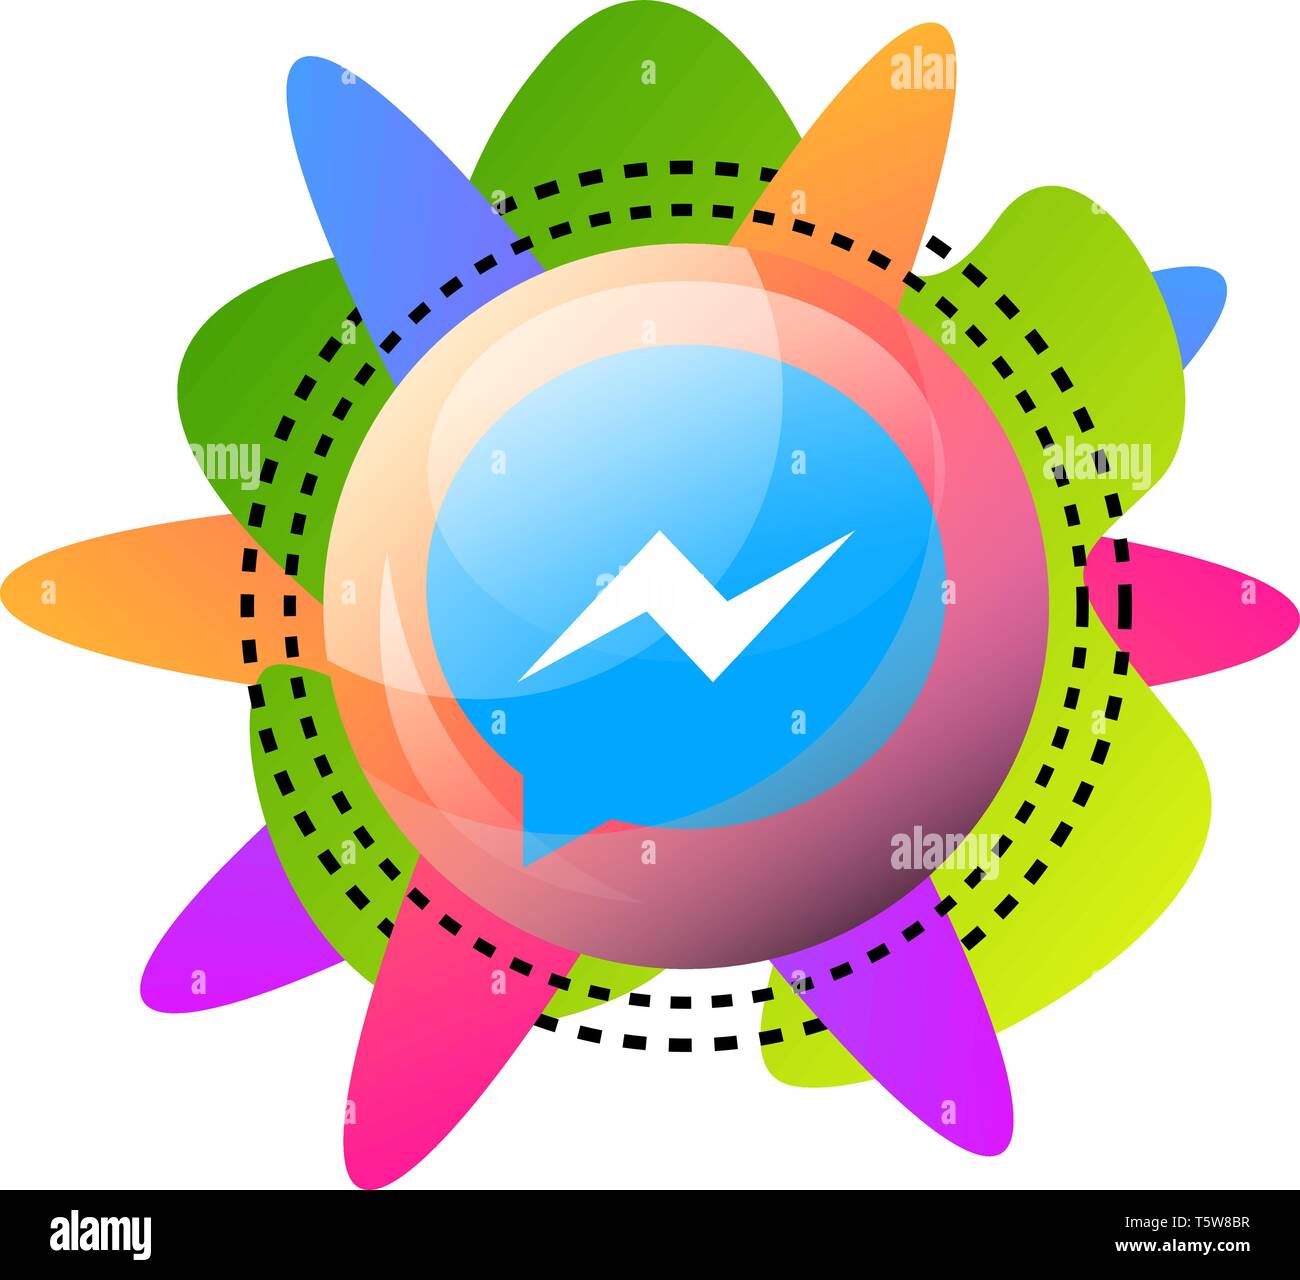 Facebook Messenger Sign Inside A Bubble With Colorful Shapes Vecor Icon Illustration On A White Background Stock Vector Image Art Alamy